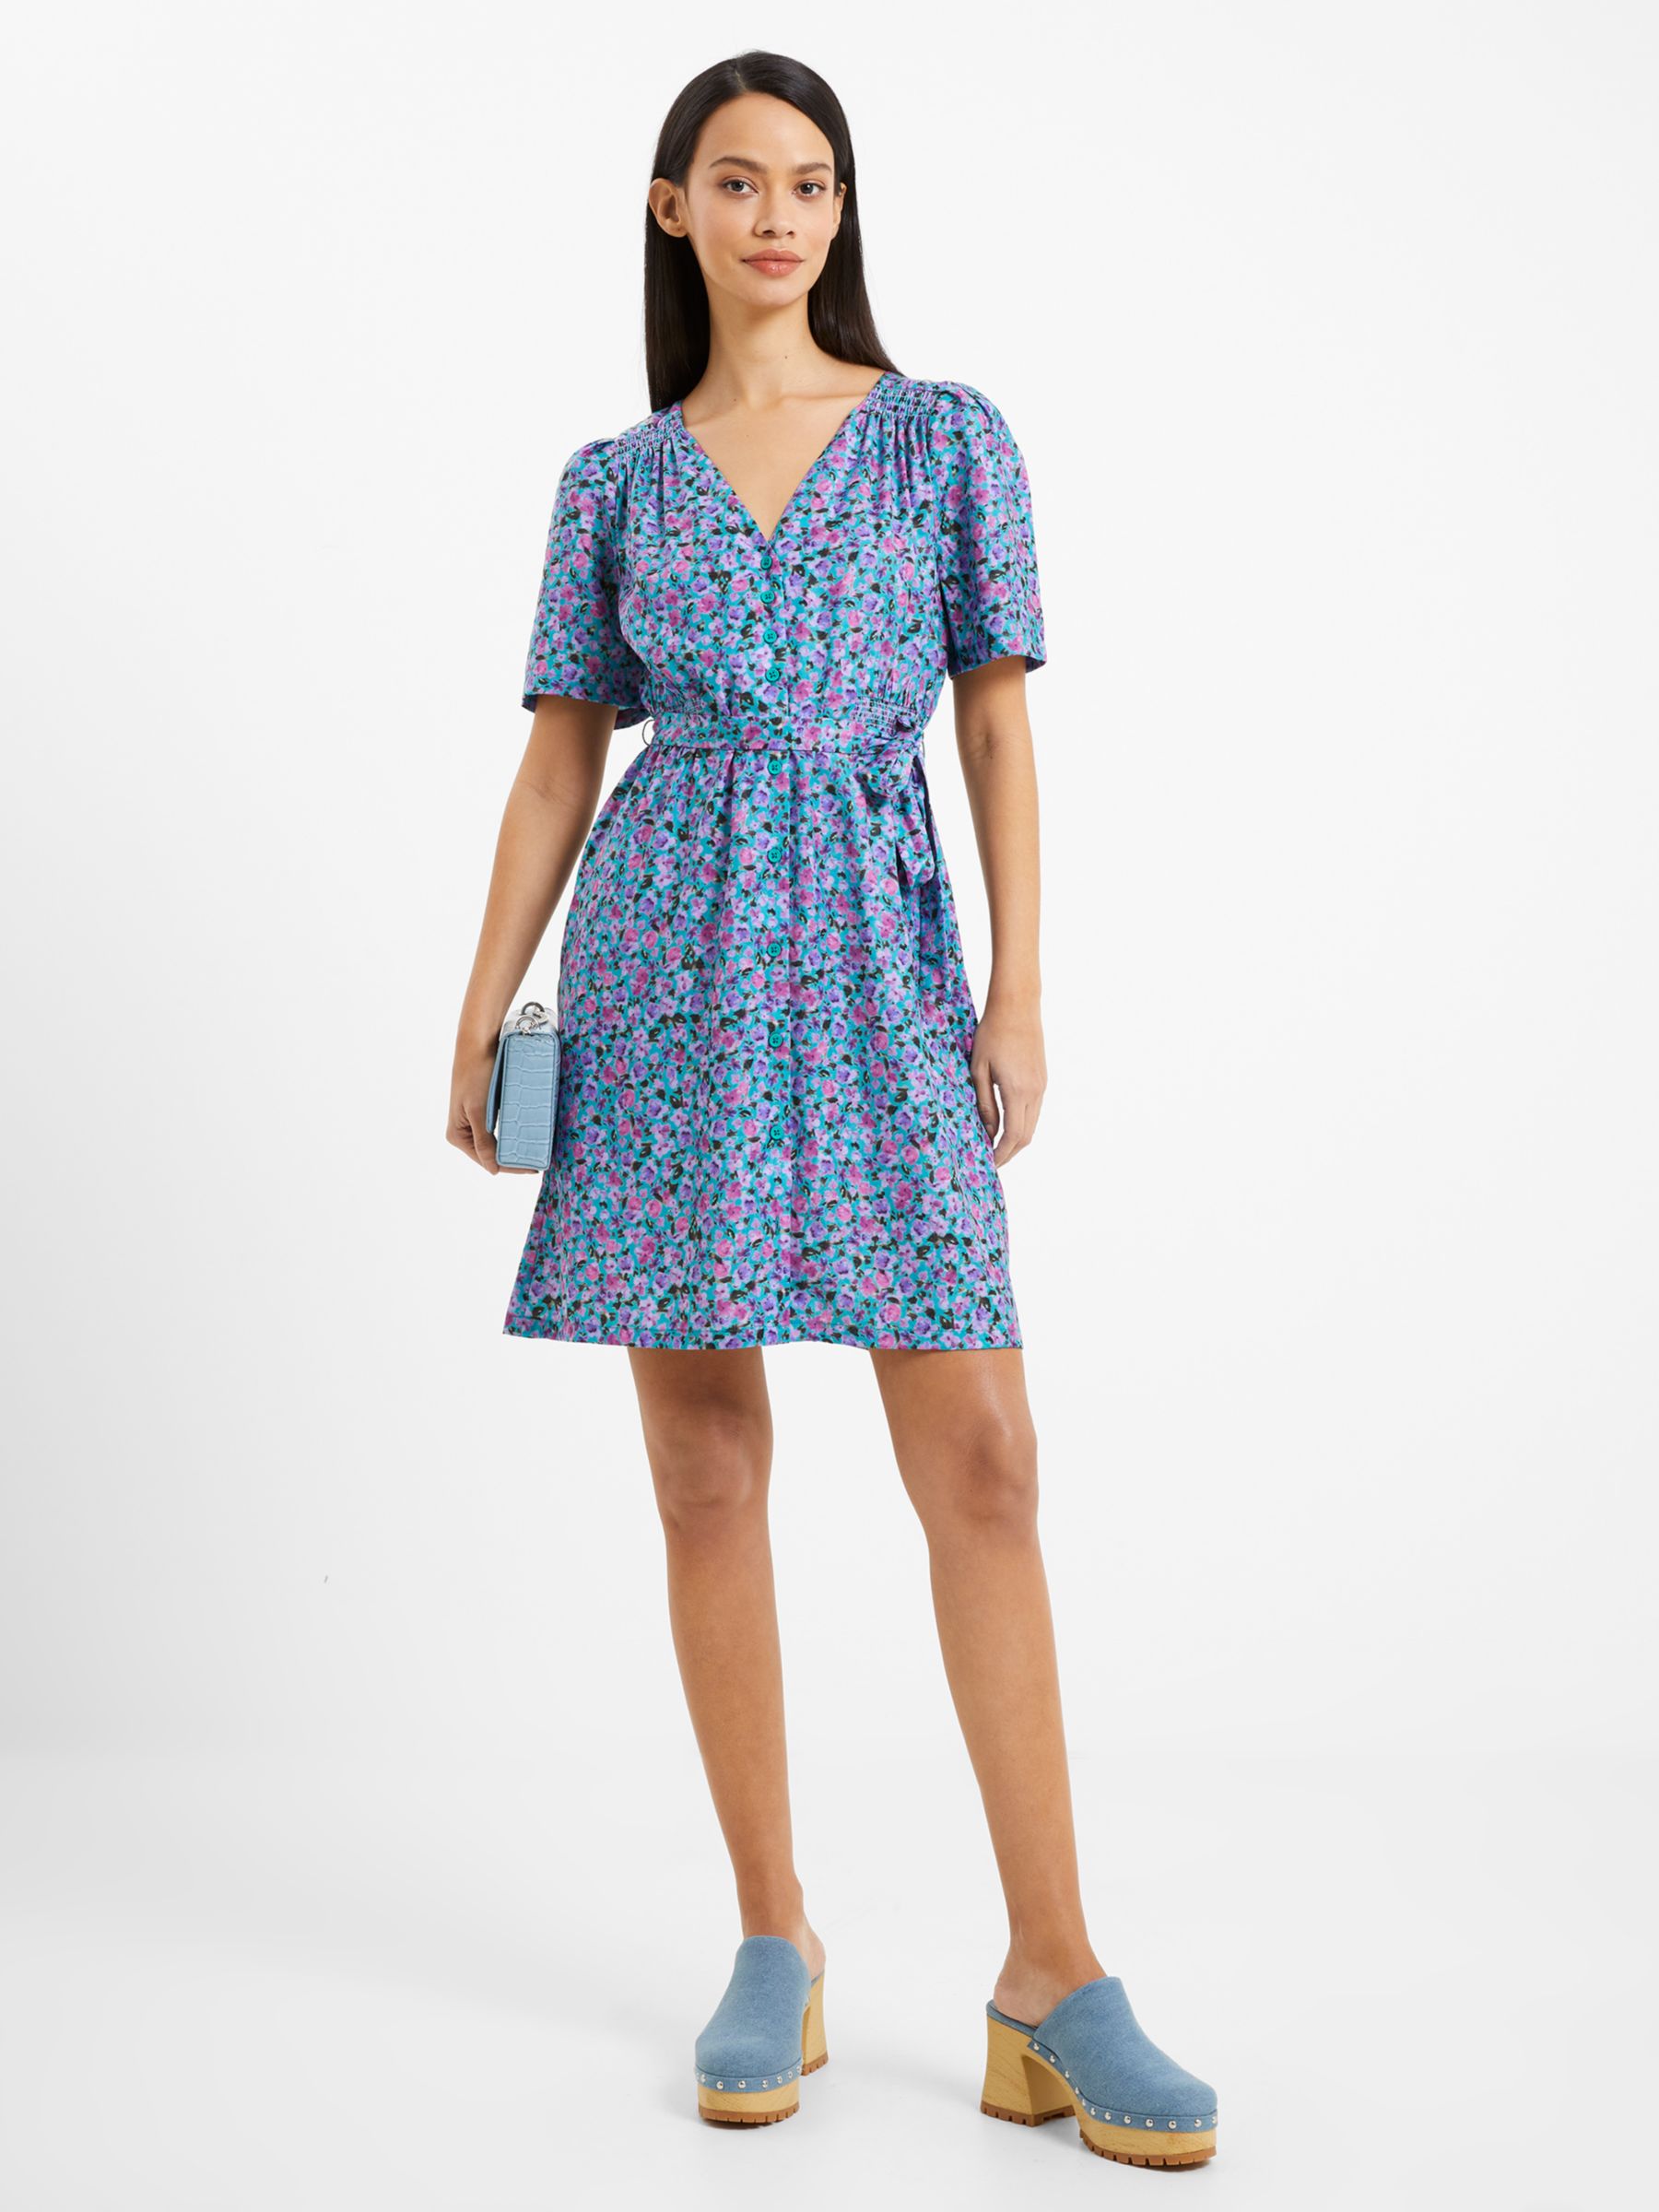 French Connection Alezzia Floral Mini Dress, Jaded Teal, 6